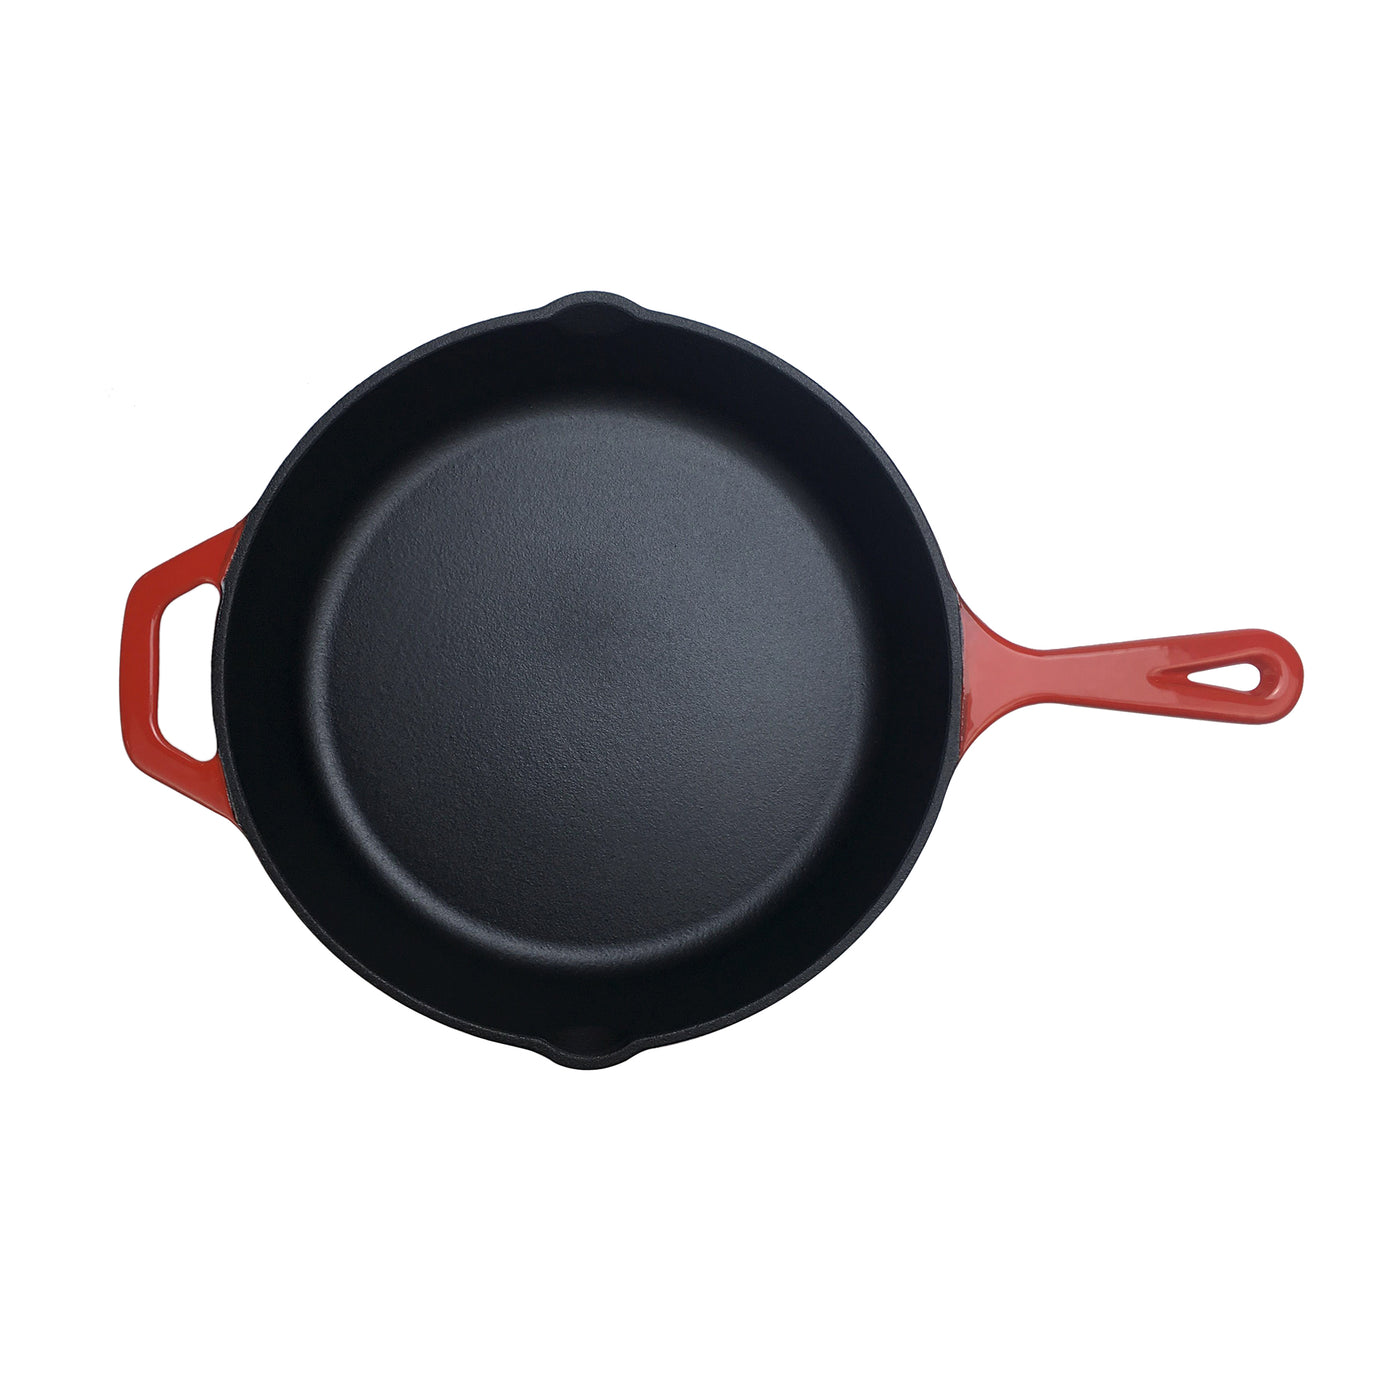 10.25"/26 cm Enameled Cast Iron Skillet Frying Pan + 2 Silicone Handle Covers